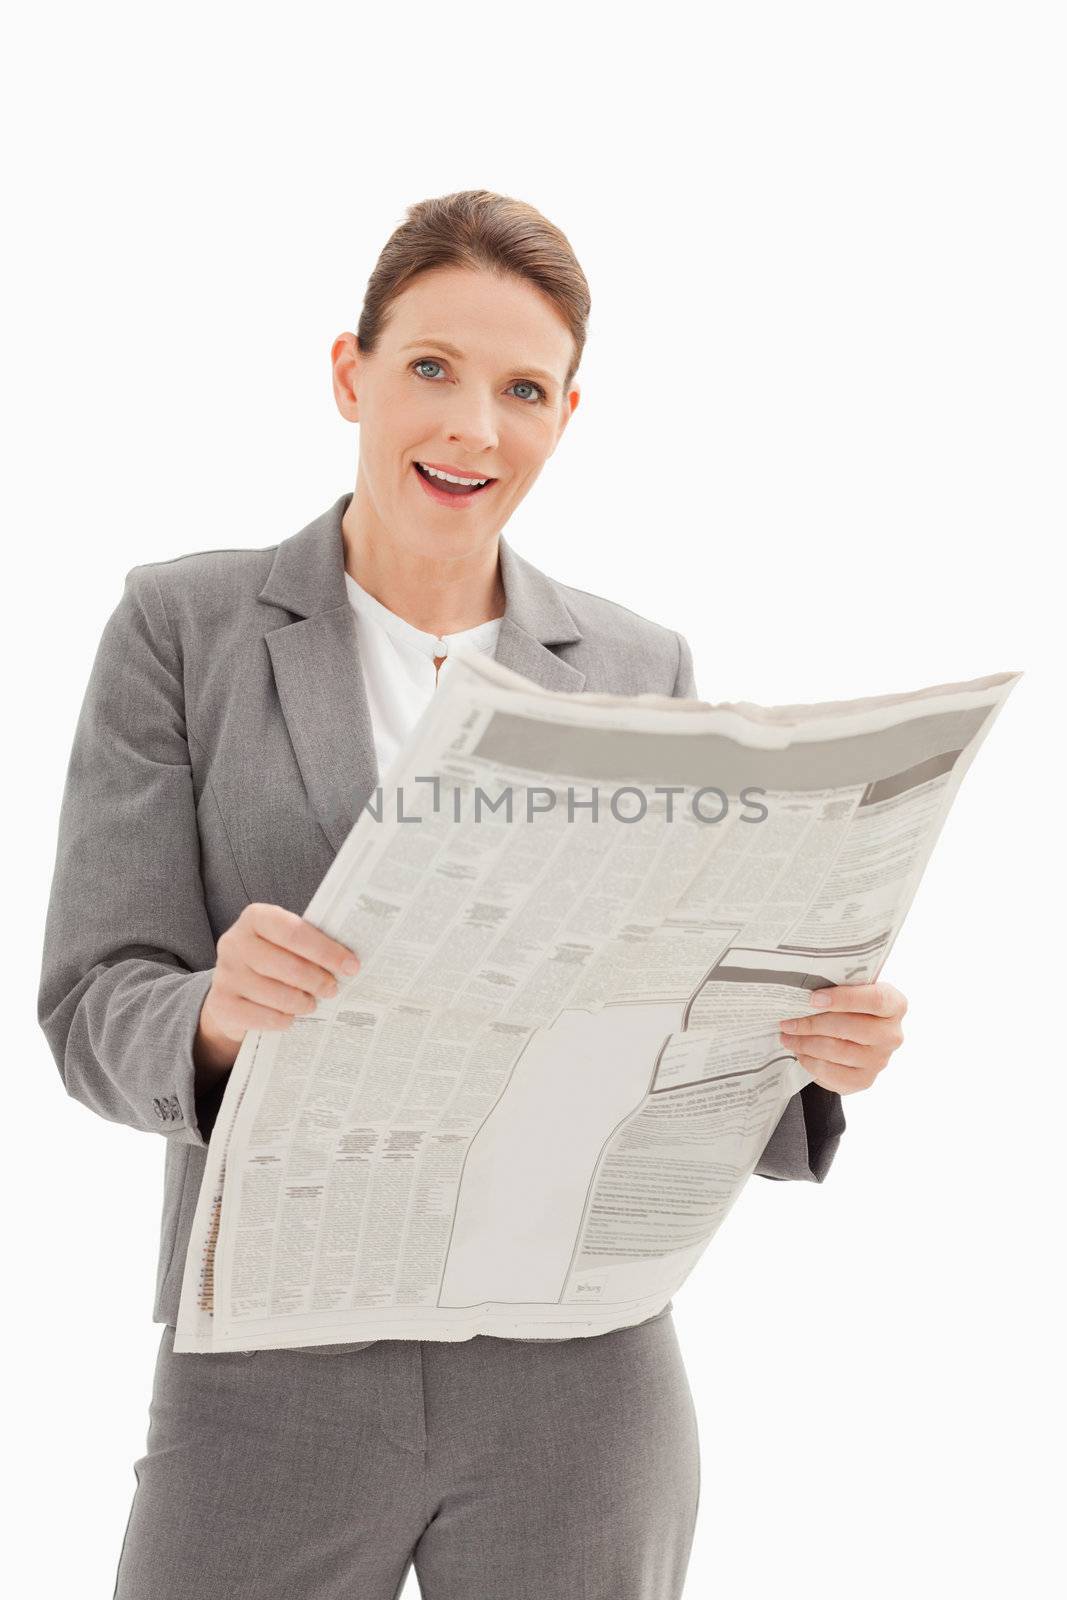 A surprised businesswoman is holding a newspaper